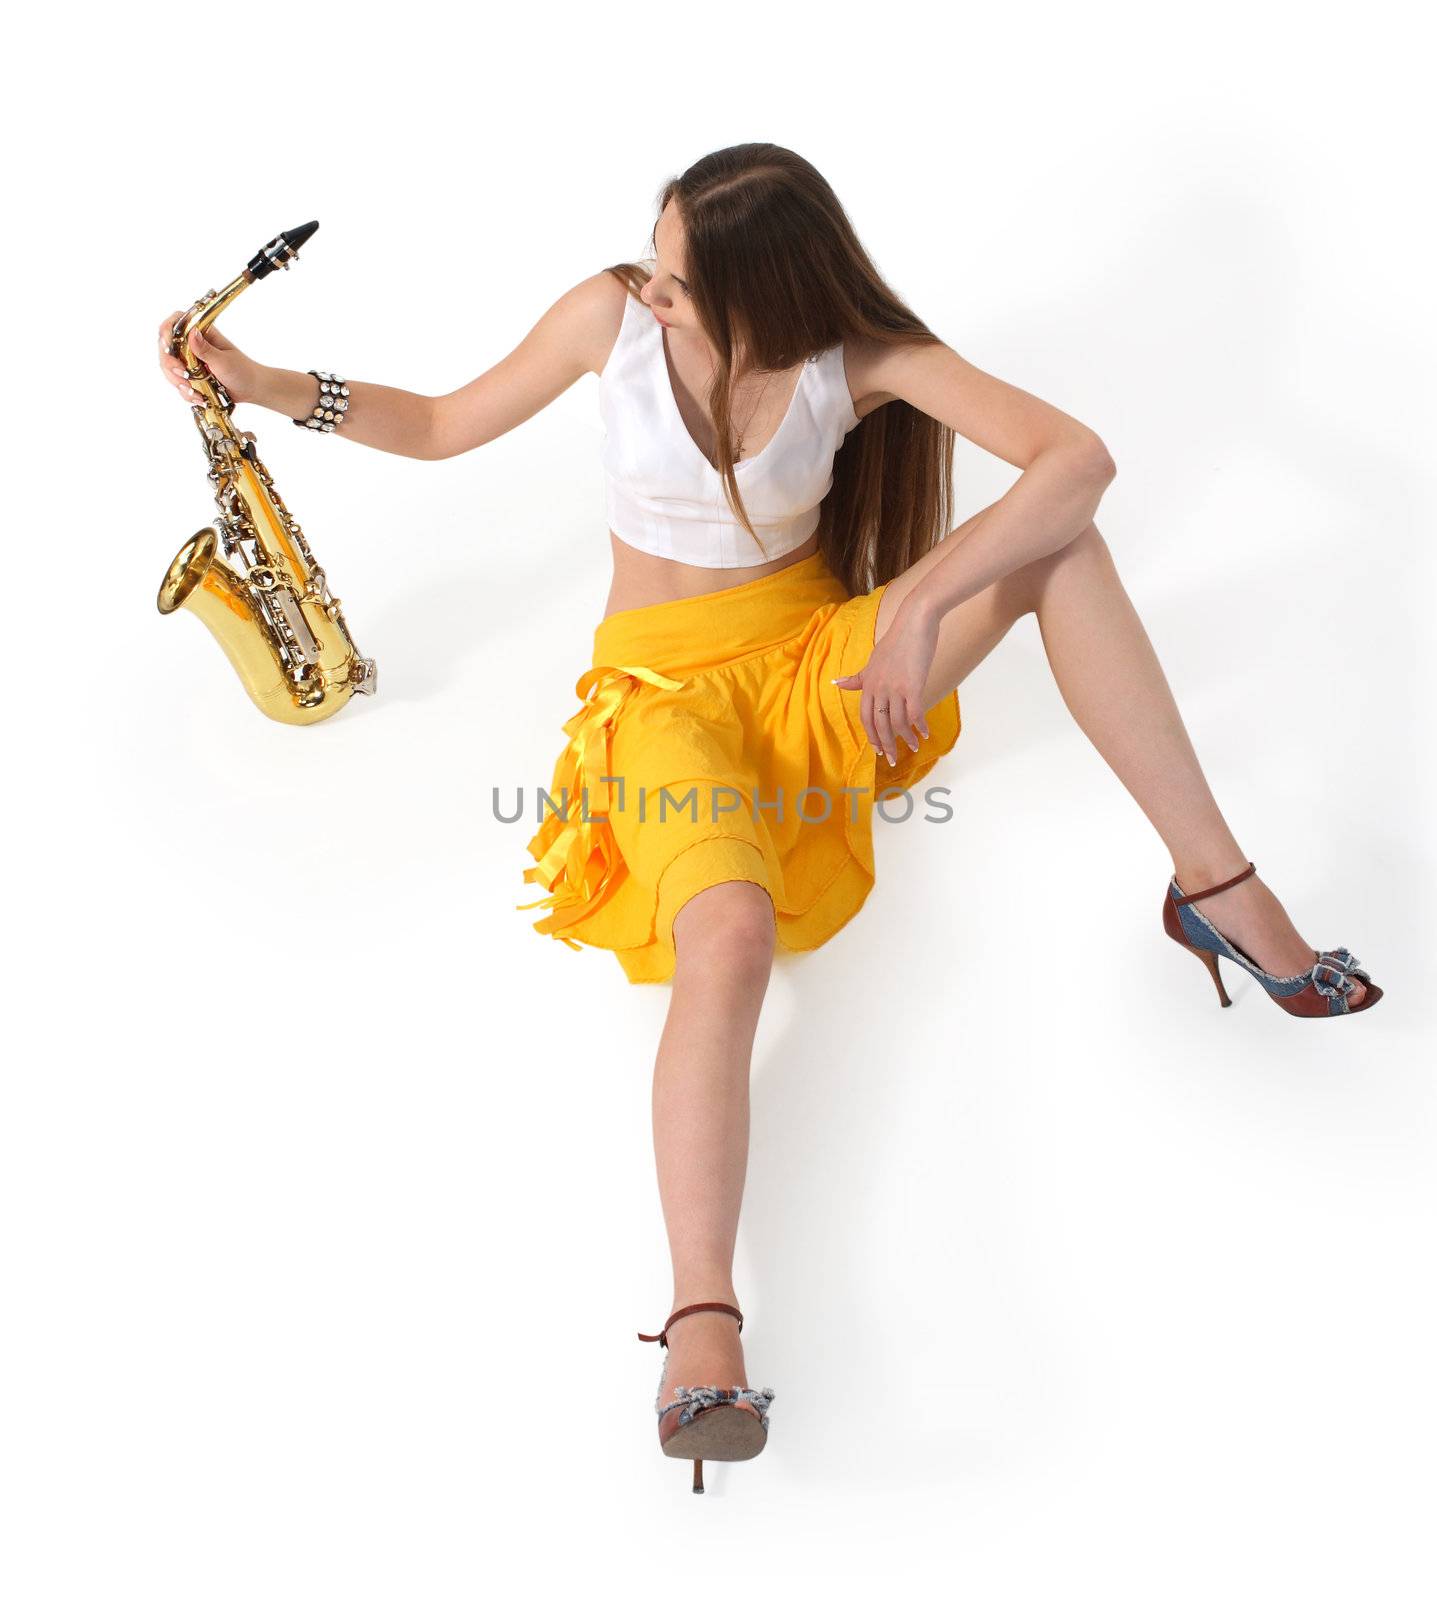 Women's long sitting with sax on tne white background
